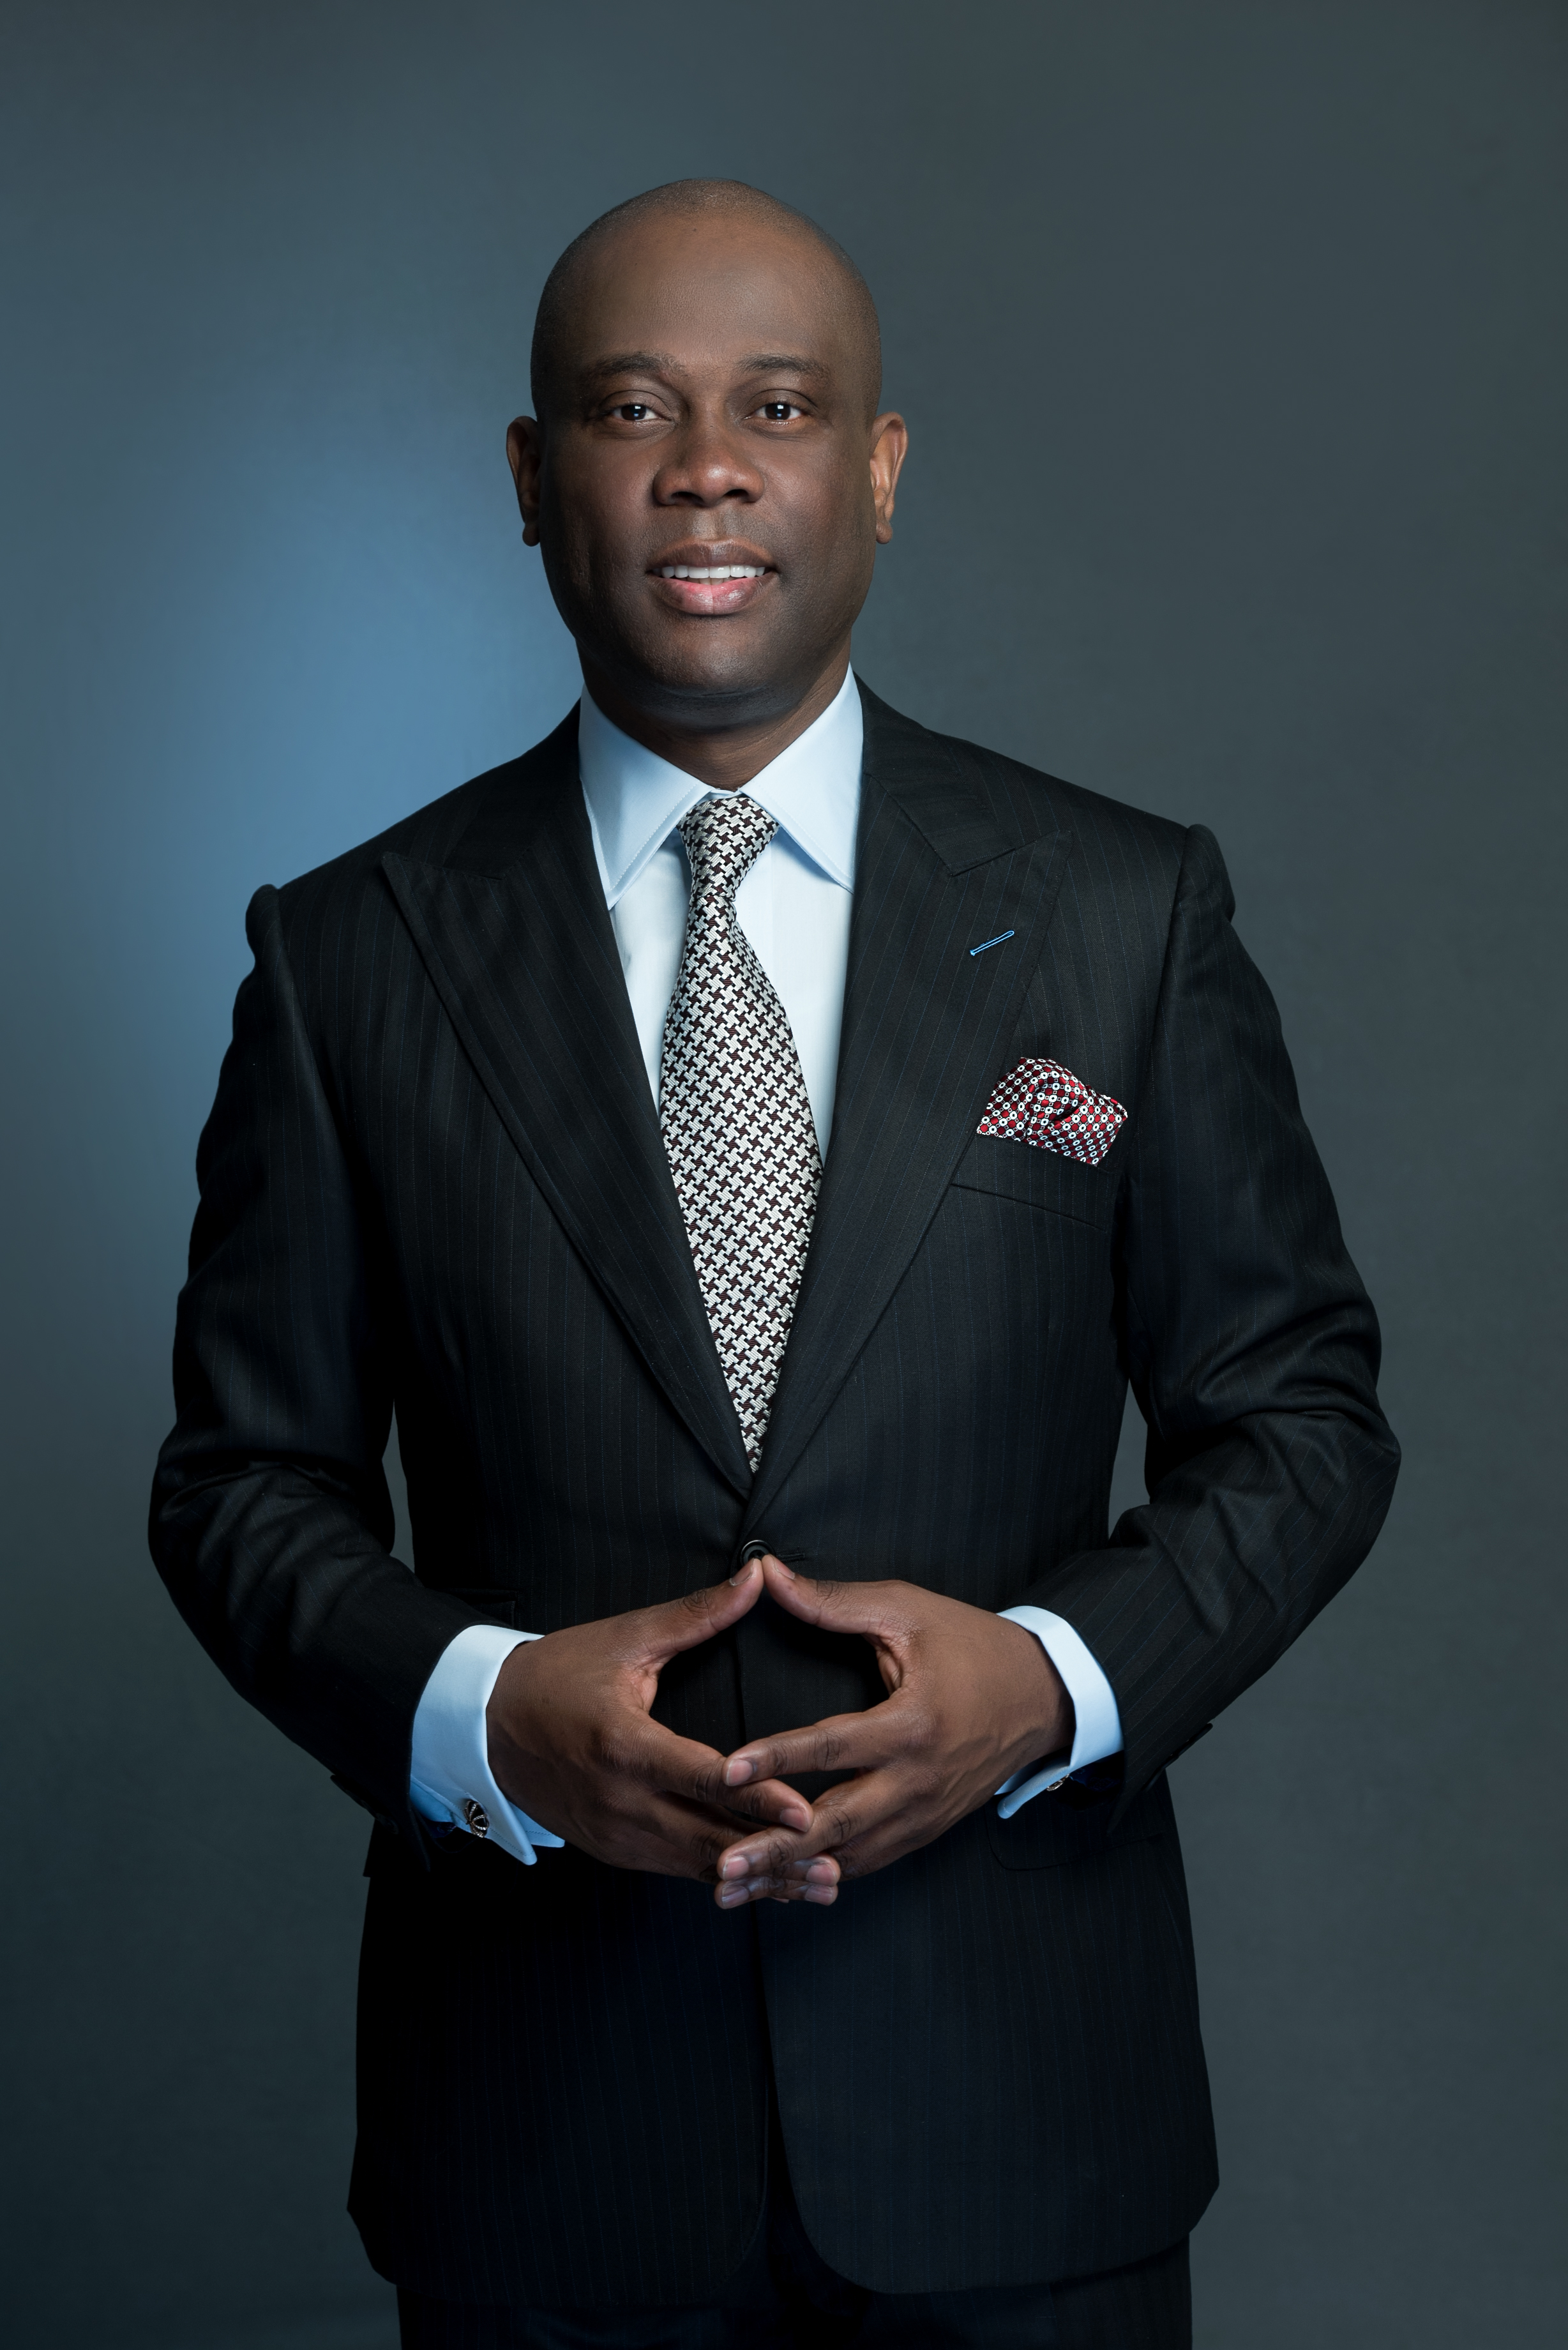 Herbert Wigwe, Access bank CEO bags ‘African Banker of the year’ award for second time